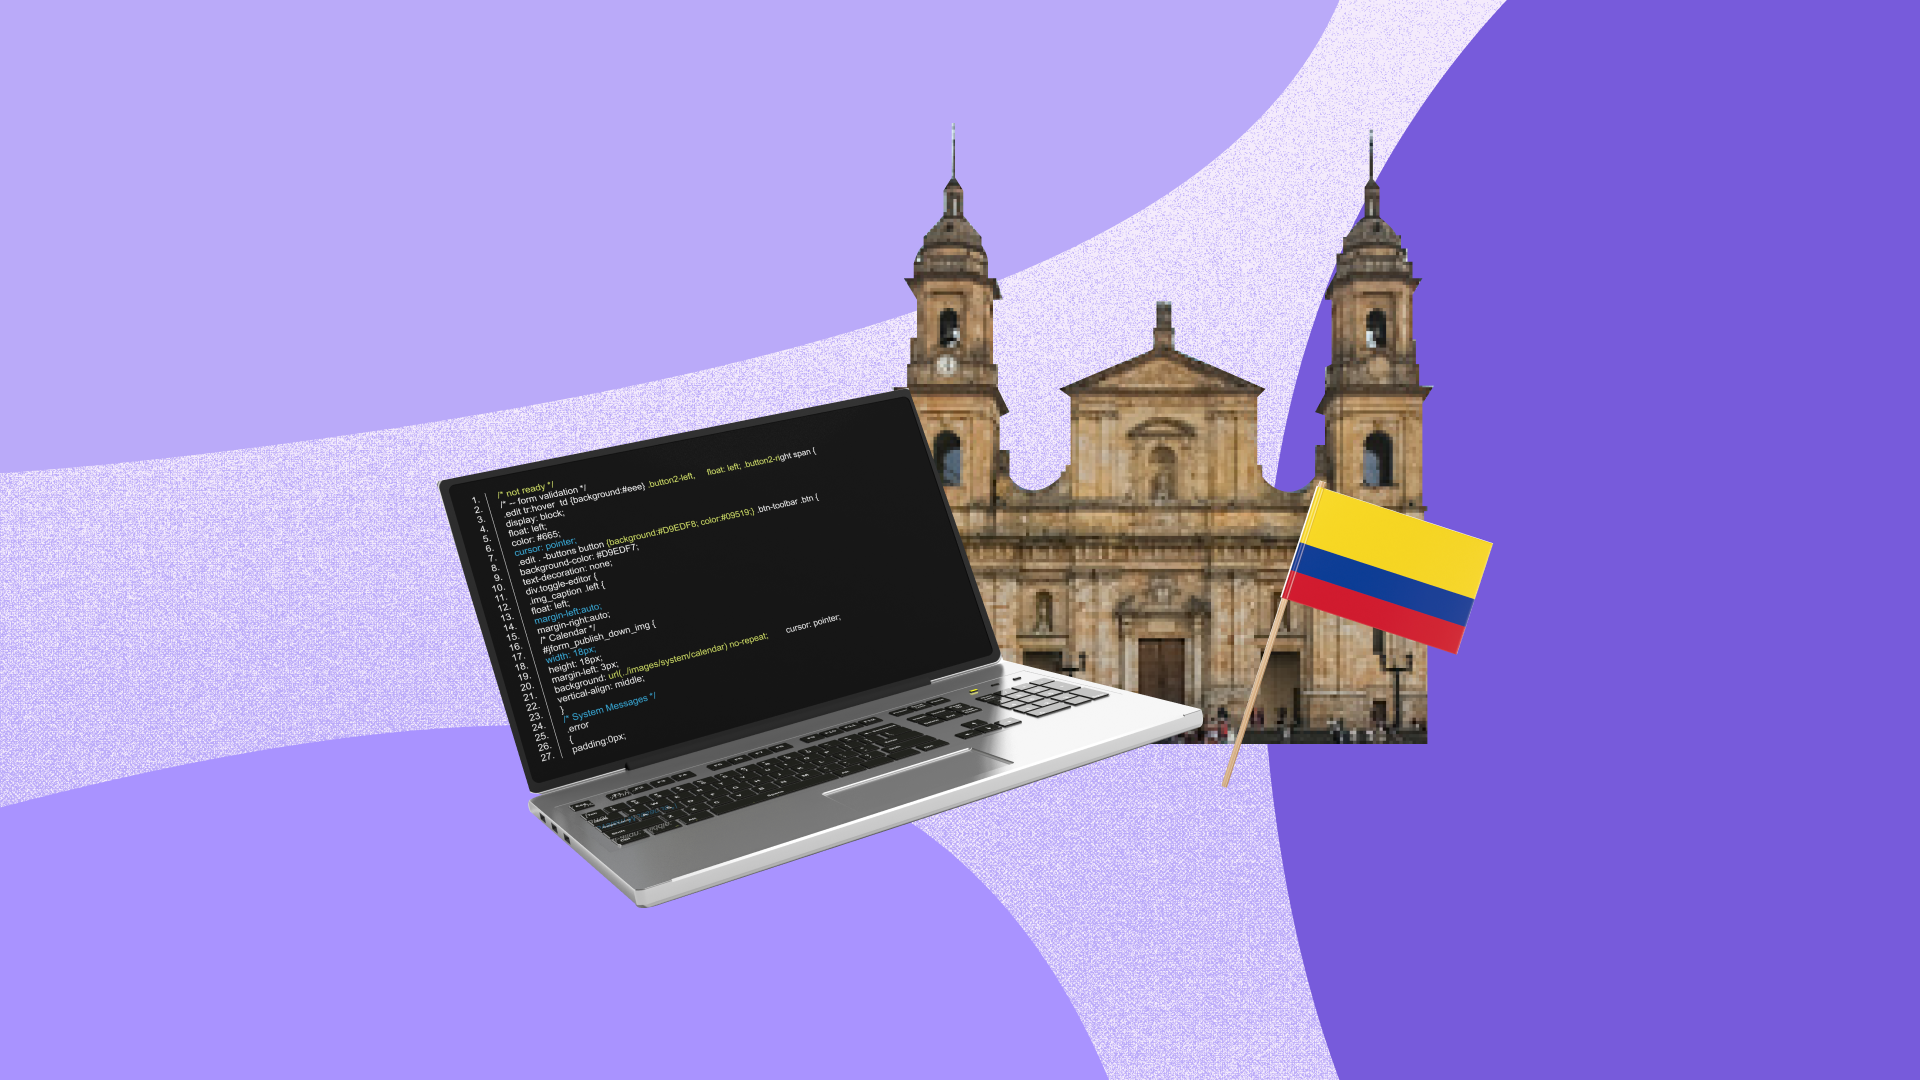 74 1920x1080 hire-developers-software-engineers-in-bogota-colombia